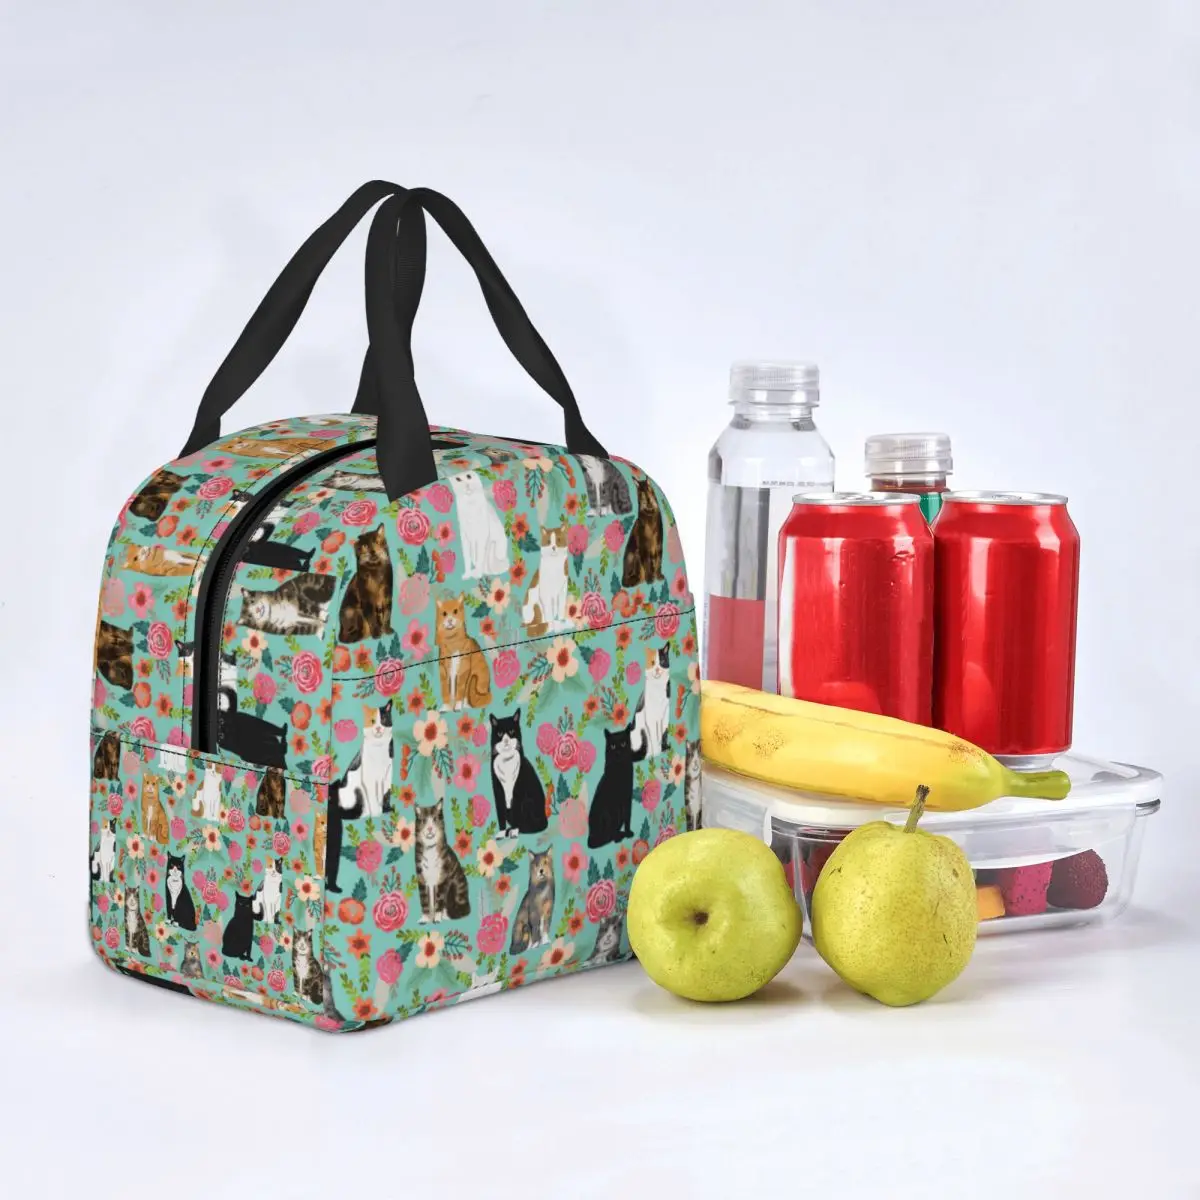 Lunch Bag for Men Women Cats Vintage Florals Insulated Cooler Bags Waterproof Picnic School Animal Oxford Tote Bento Pouch